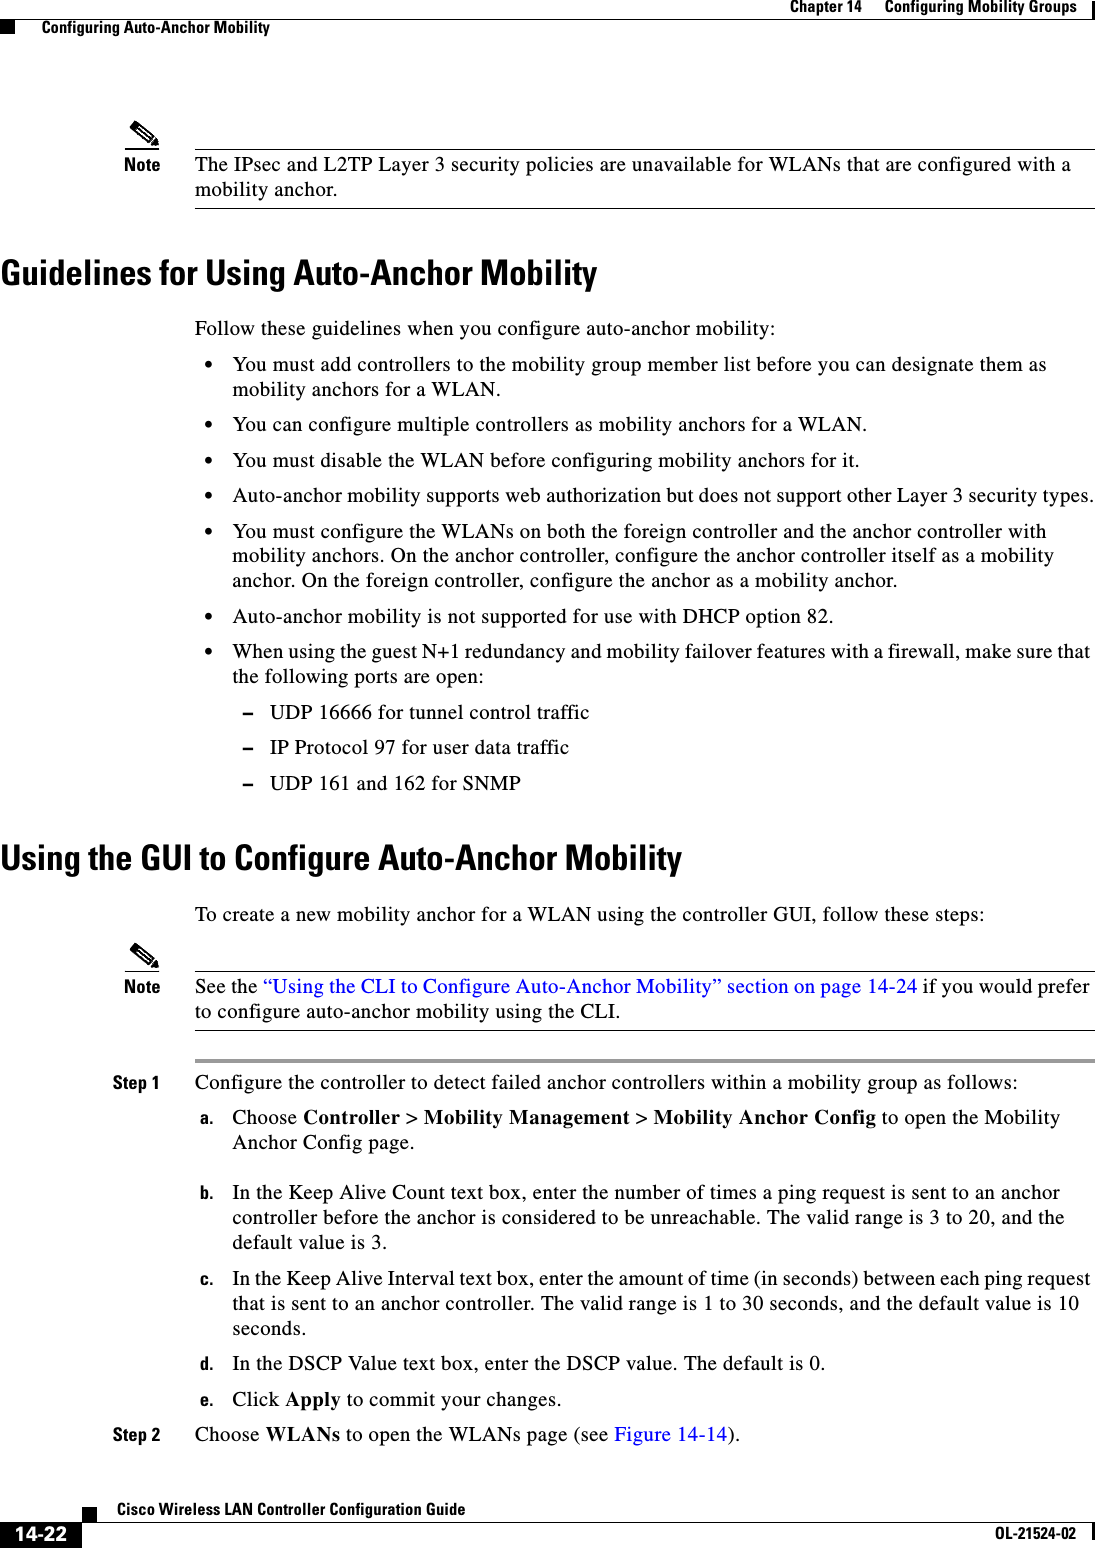  14-22Cisco Wireless LAN Controller Configuration GuideOL-21524-02Chapter 14      Configuring Mobility Groups  Configuring Auto-Anchor MobilityNote The IPsec and L2TP Layer 3 security policies are unavailable for WLANs that are configured with a mobility anchor.Guidelines for Using Auto-Anchor MobilityFollow these guidelines when you configure auto-anchor mobility:  • You must add controllers to the mobility group member list before you can designate them as mobility anchors for a WLAN.  • You can configure multiple controllers as mobility anchors for a WLAN.  • You must disable the WLAN before configuring mobility anchors for it.  • Auto-anchor mobility supports web authorization but does not support other Layer 3 security types.  • You must configure the WLANs on both the foreign controller and the anchor controller with mobility anchors. On the anchor controller, configure the anchor controller itself as a mobility anchor. On the foreign controller, configure the anchor as a mobility anchor.  • Auto-anchor mobility is not supported for use with DHCP option 82.  • When using the guest N+1 redundancy and mobility failover features with a firewall, make sure that the following ports are open:  –UDP 16666 for tunnel control traffic  –IP Protocol 97 for user data traffic  –UDP 161 and 162 for SNMPUsing the GUI to Configure Auto-Anchor MobilityTo create a new mobility anchor for a WLAN using the controller GUI, follow these steps:Note See the “Using the CLI to Configure Auto-Anchor Mobility” section on page 14-24 if you would prefer to configure auto-anchor mobility using the CLI.Step 1 Configure the controller to detect failed anchor controllers within a mobility group as follows:a. Choose Controller &gt; Mobility Management &gt; Mobility Anchor Config to open the Mobility Anchor Config page.b. In the Keep Alive Count text box, enter the number of times a ping request is sent to an anchor controller before the anchor is considered to be unreachable. The valid range is 3 to 20, and the default value is 3.c. In the Keep Alive Interval text box, enter the amount of time (in seconds) between each ping request that is sent to an anchor controller. The valid range is 1 to 30 seconds, and the default value is 10 seconds.d. In the DSCP Value text box, enter the DSCP value. The default is 0.e. Click Apply to commit your changes.Step 2 Choose WLANs to open the WLANs page (see Figure 14-14).